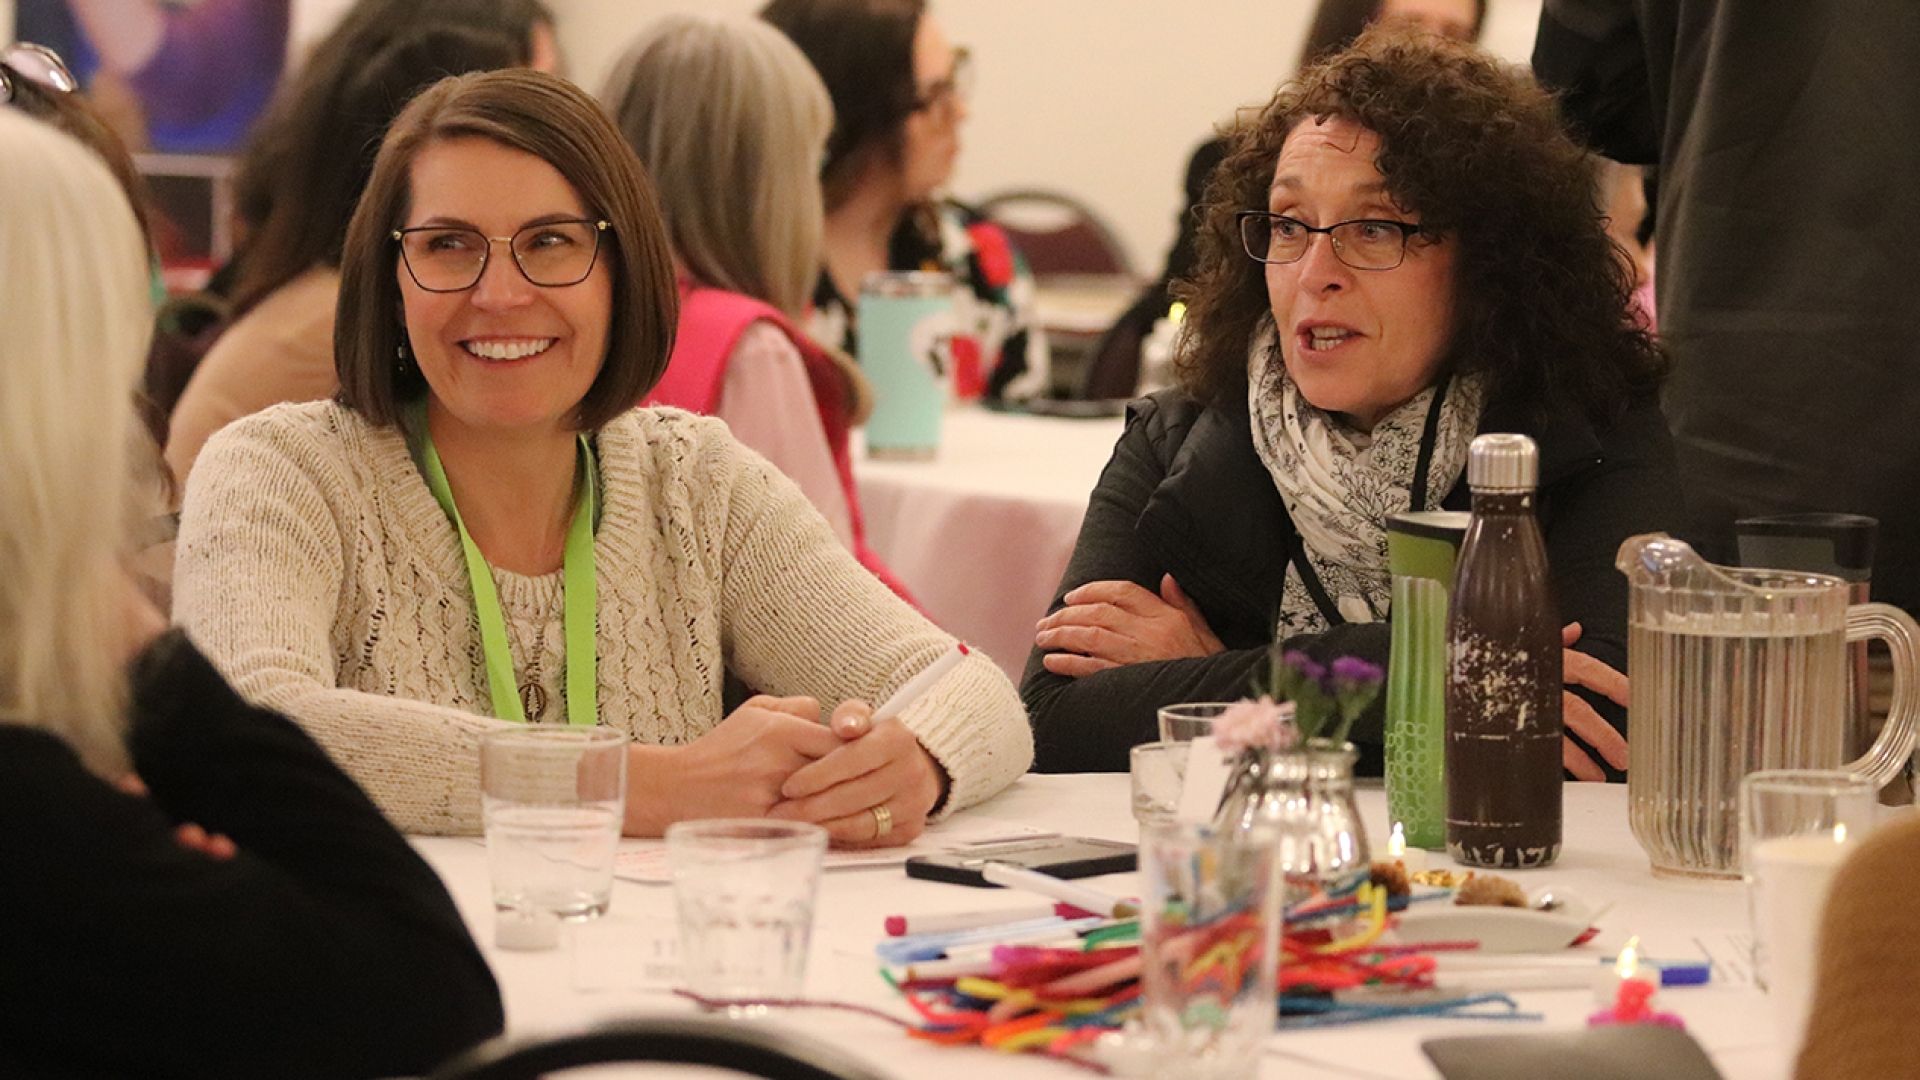 Selkirk College faculty Rhonda Belczyk and Leanna Kozak participating in a table conversation